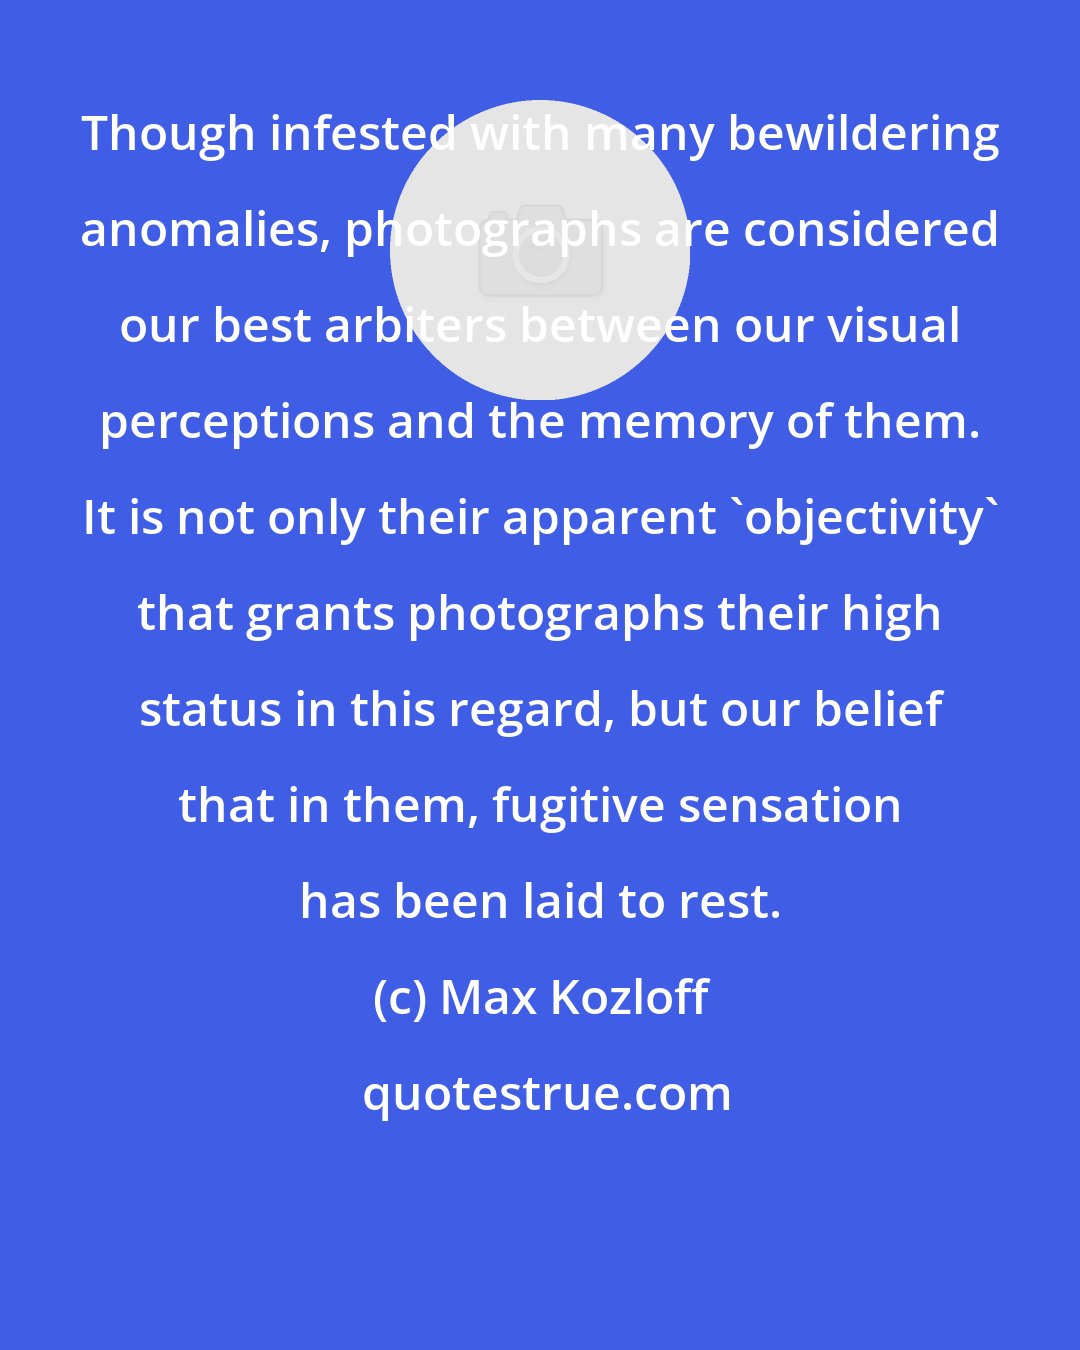 Max Kozloff: Though infested with many bewildering anomalies, photographs are considered our best arbiters between our visual perceptions and the memory of them. It is not only their apparent 'objectivity' that grants photographs their high status in this regard, but our belief that in them, fugitive sensation has been laid to rest.